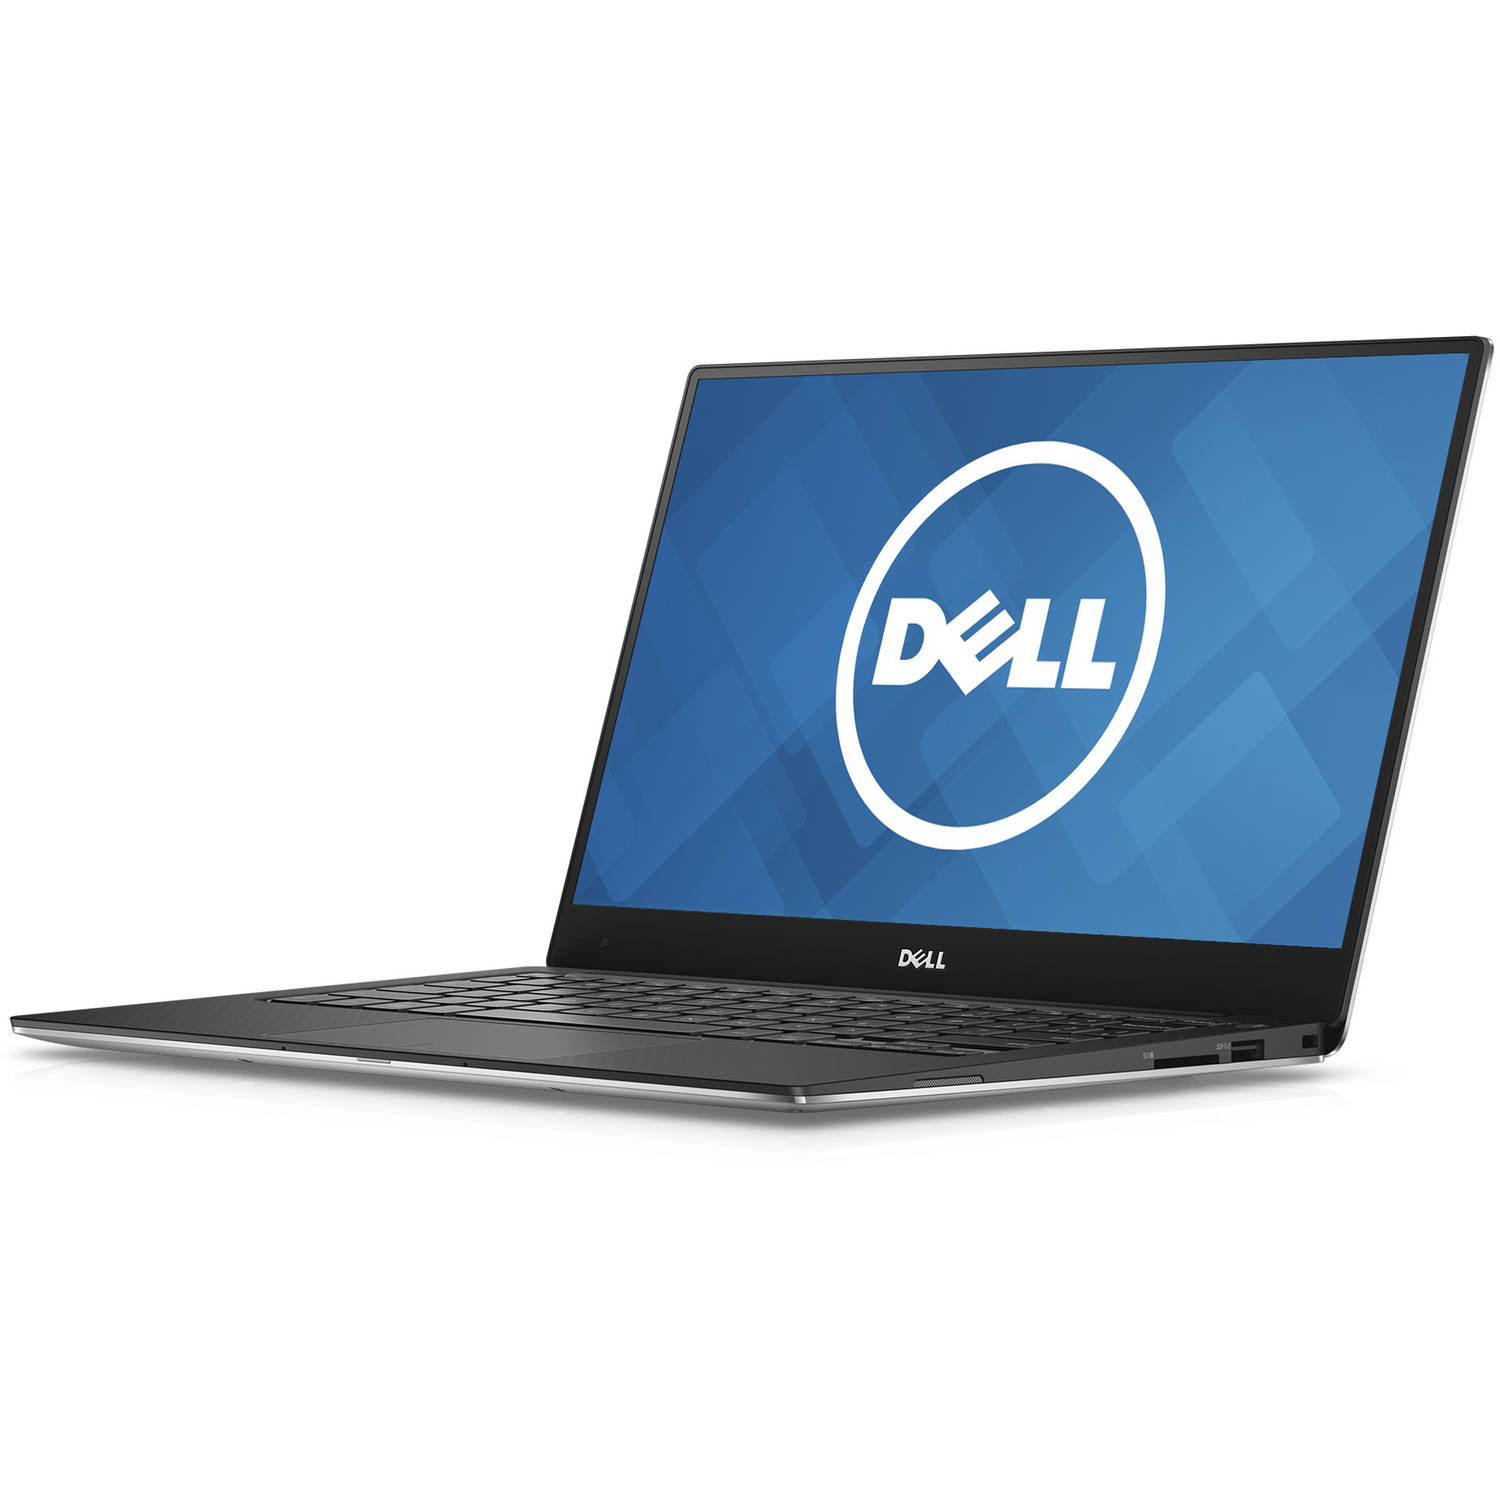 Dell XPS 13 9360 - Intel Core i5 - 7200U / up to 3.1 GHz - Win 10 Home 64-bit - HD Graphics 620 - 8 GB RAM - 256 GB SSD - 13.3" touchscreen 3200 x 1800 (QHD+) - Wi-Fi 5 - silver - kbd: English - with 1 Year Hardware Service with Onsite/In-Home Service After Remote Diagnosis - image 3 of 25